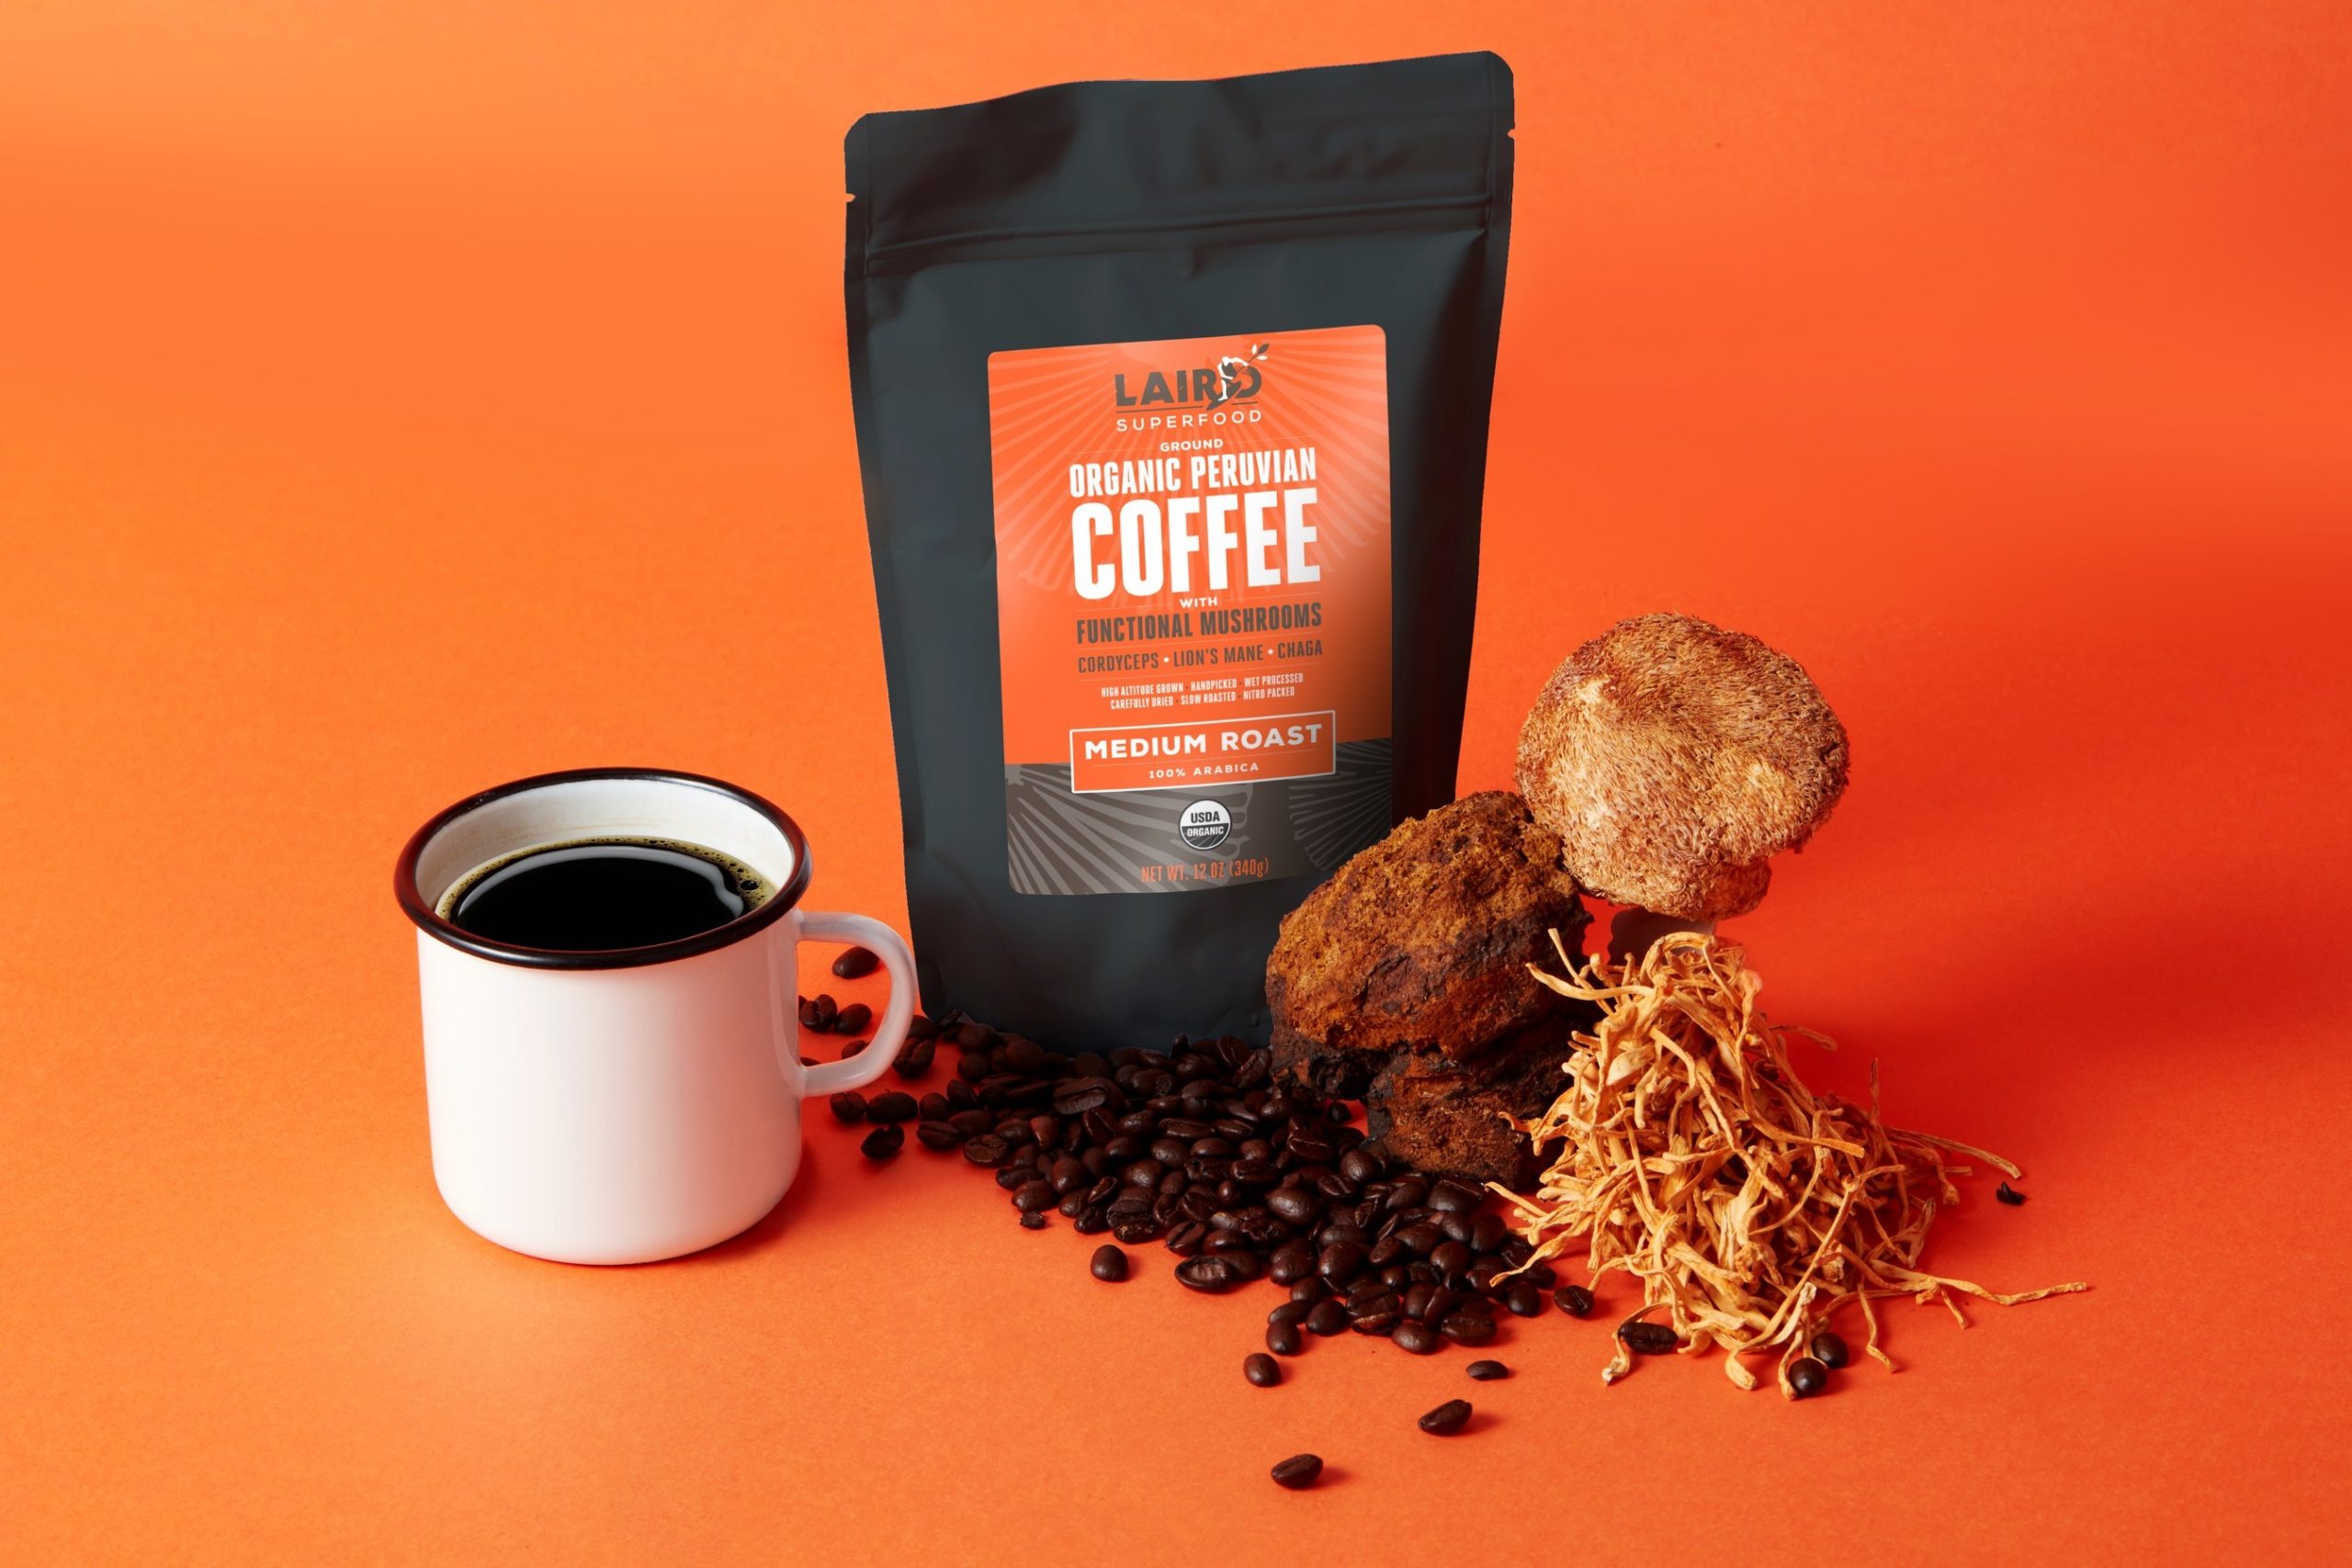 Laird Superfood Launches Coffee with Functional Mushrooms